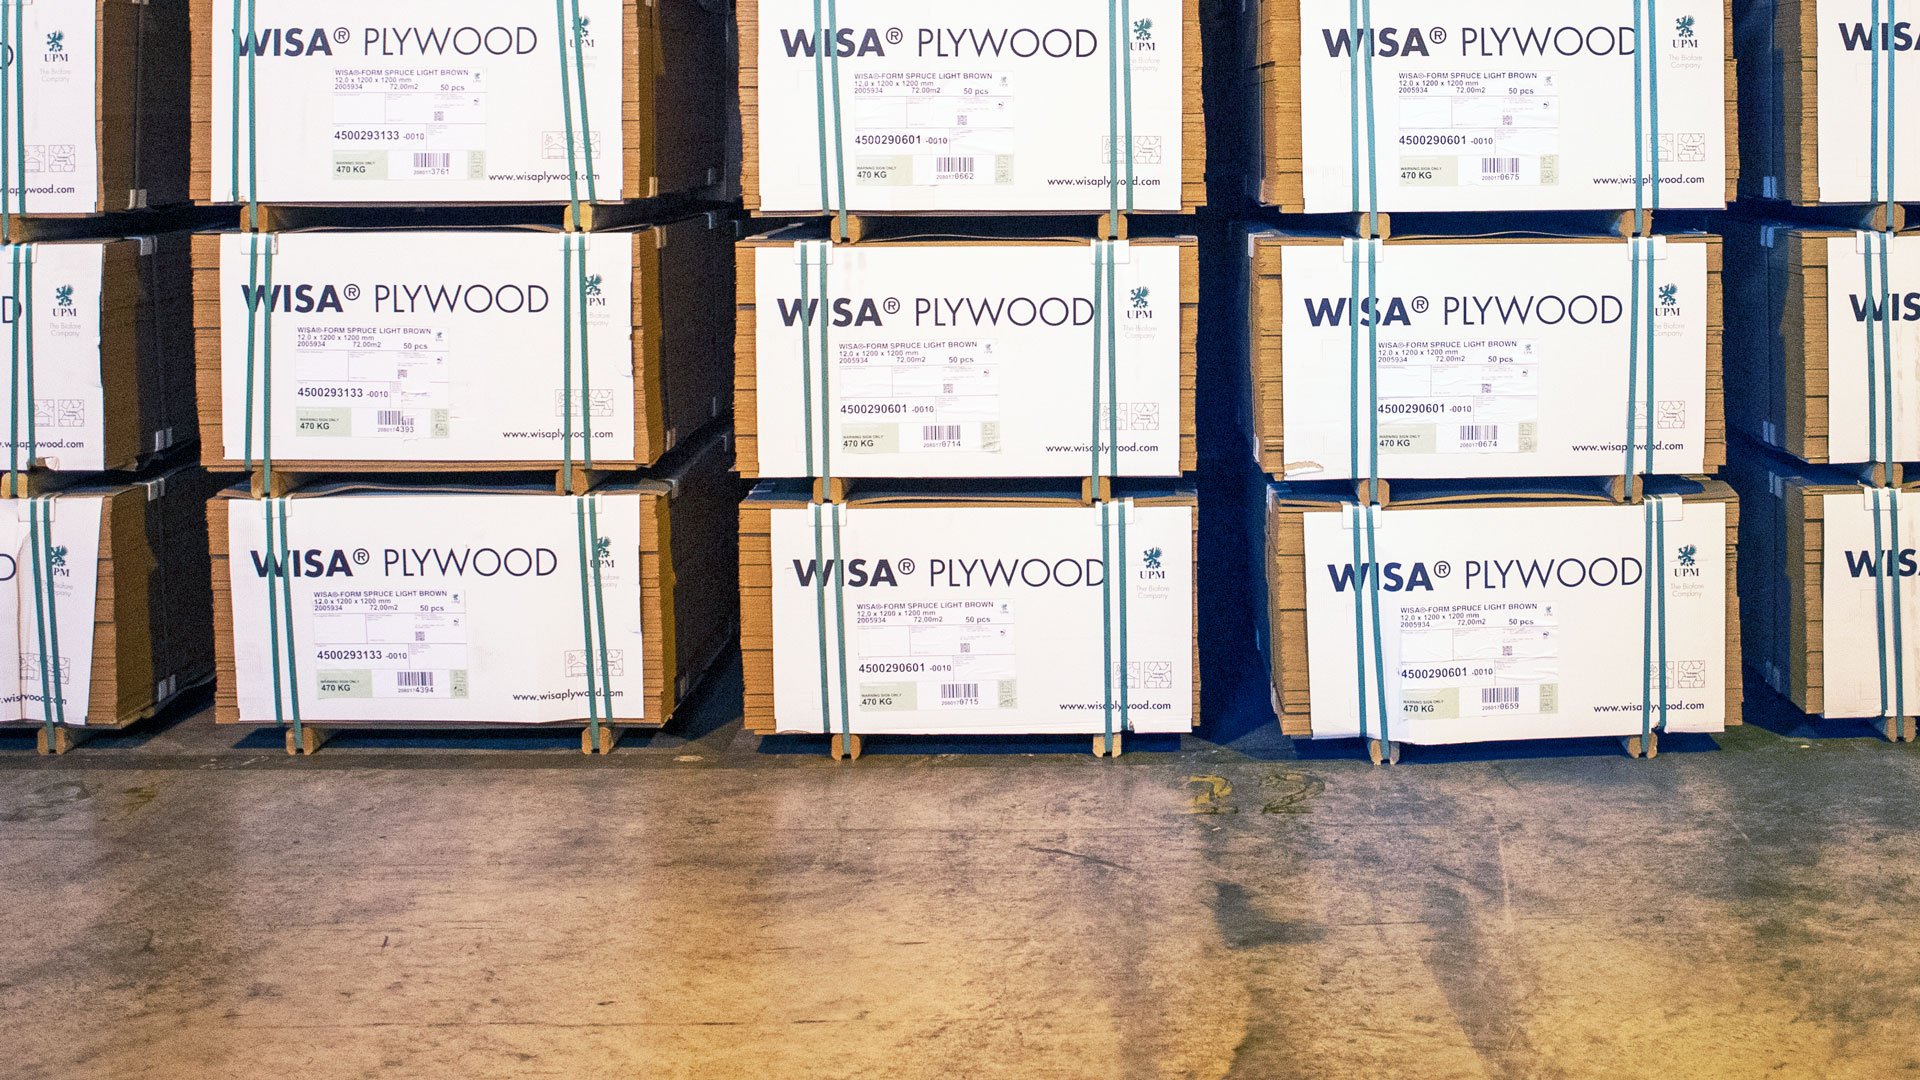 WISA plywood products are easily available from UPM Plywood’s service stocks